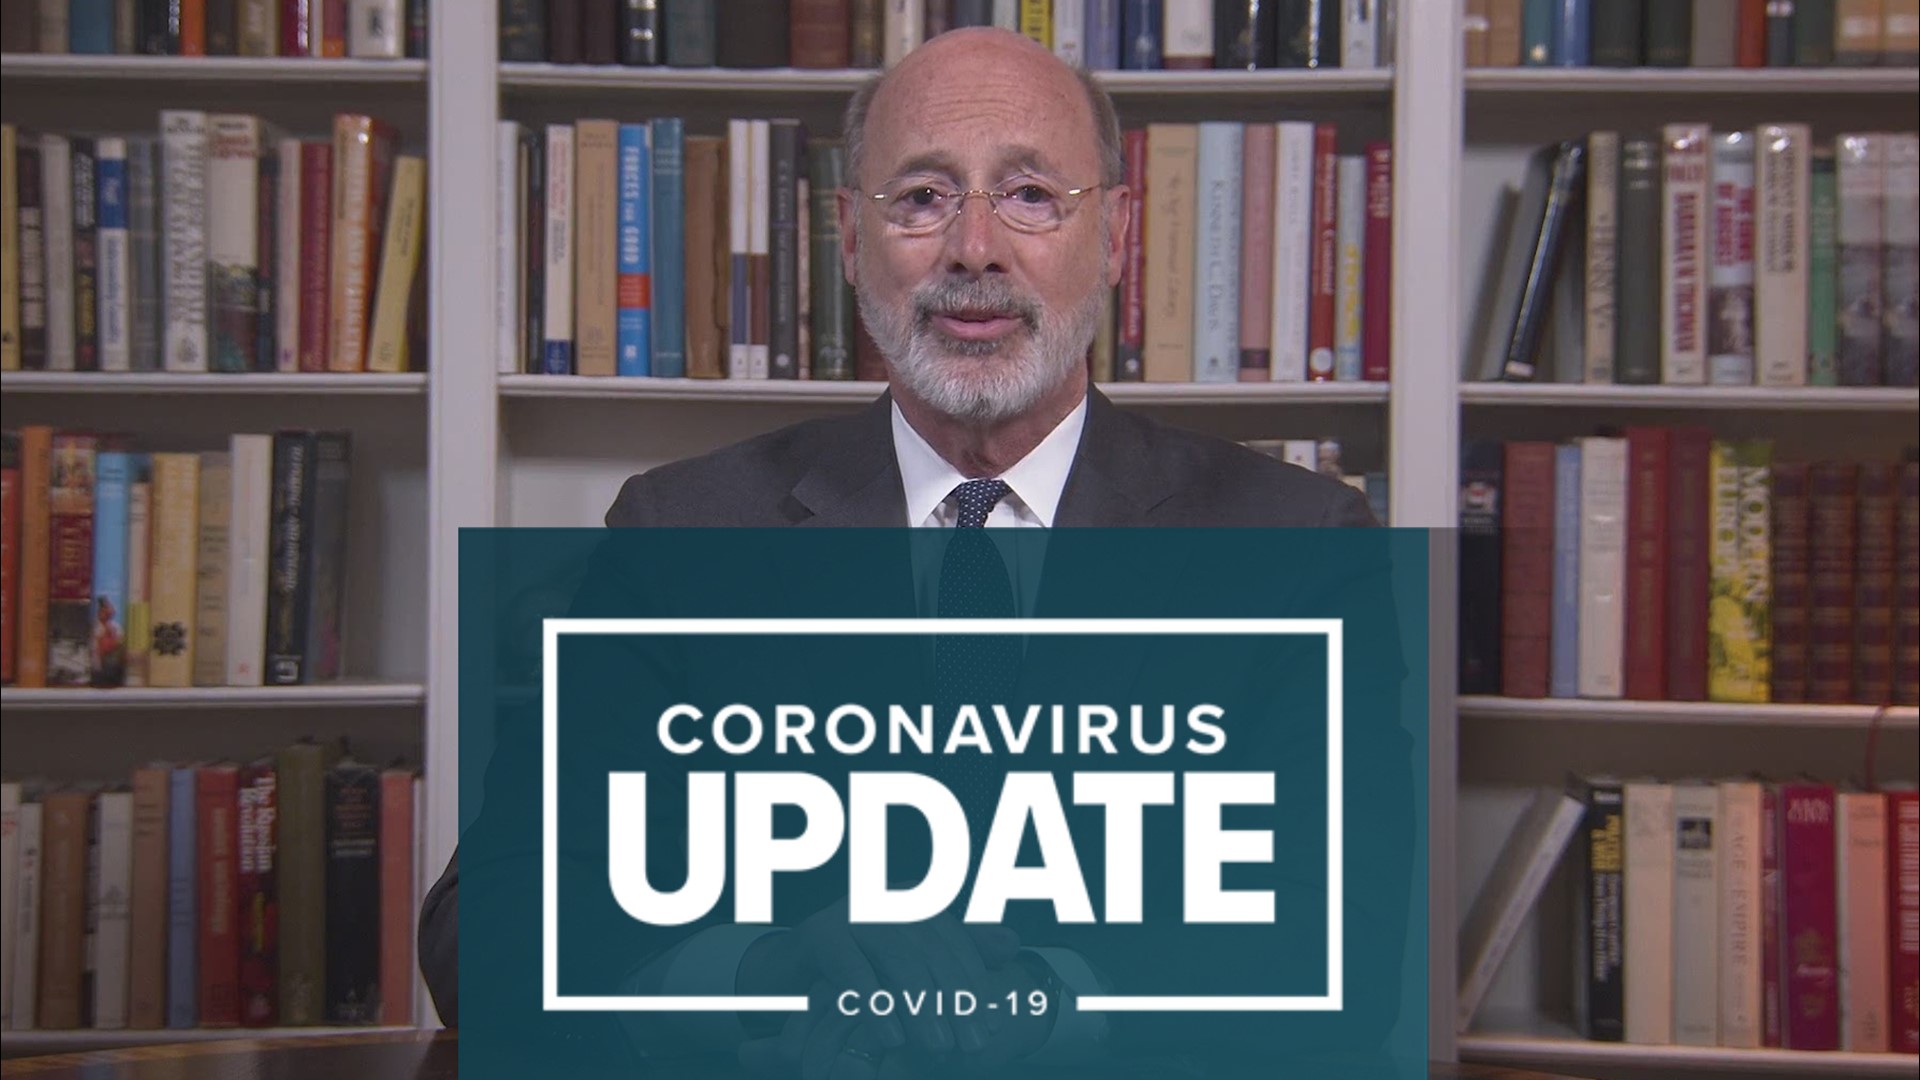 The governor issued the expanded order on Wednesday as report coronavirus cases continue to rise.